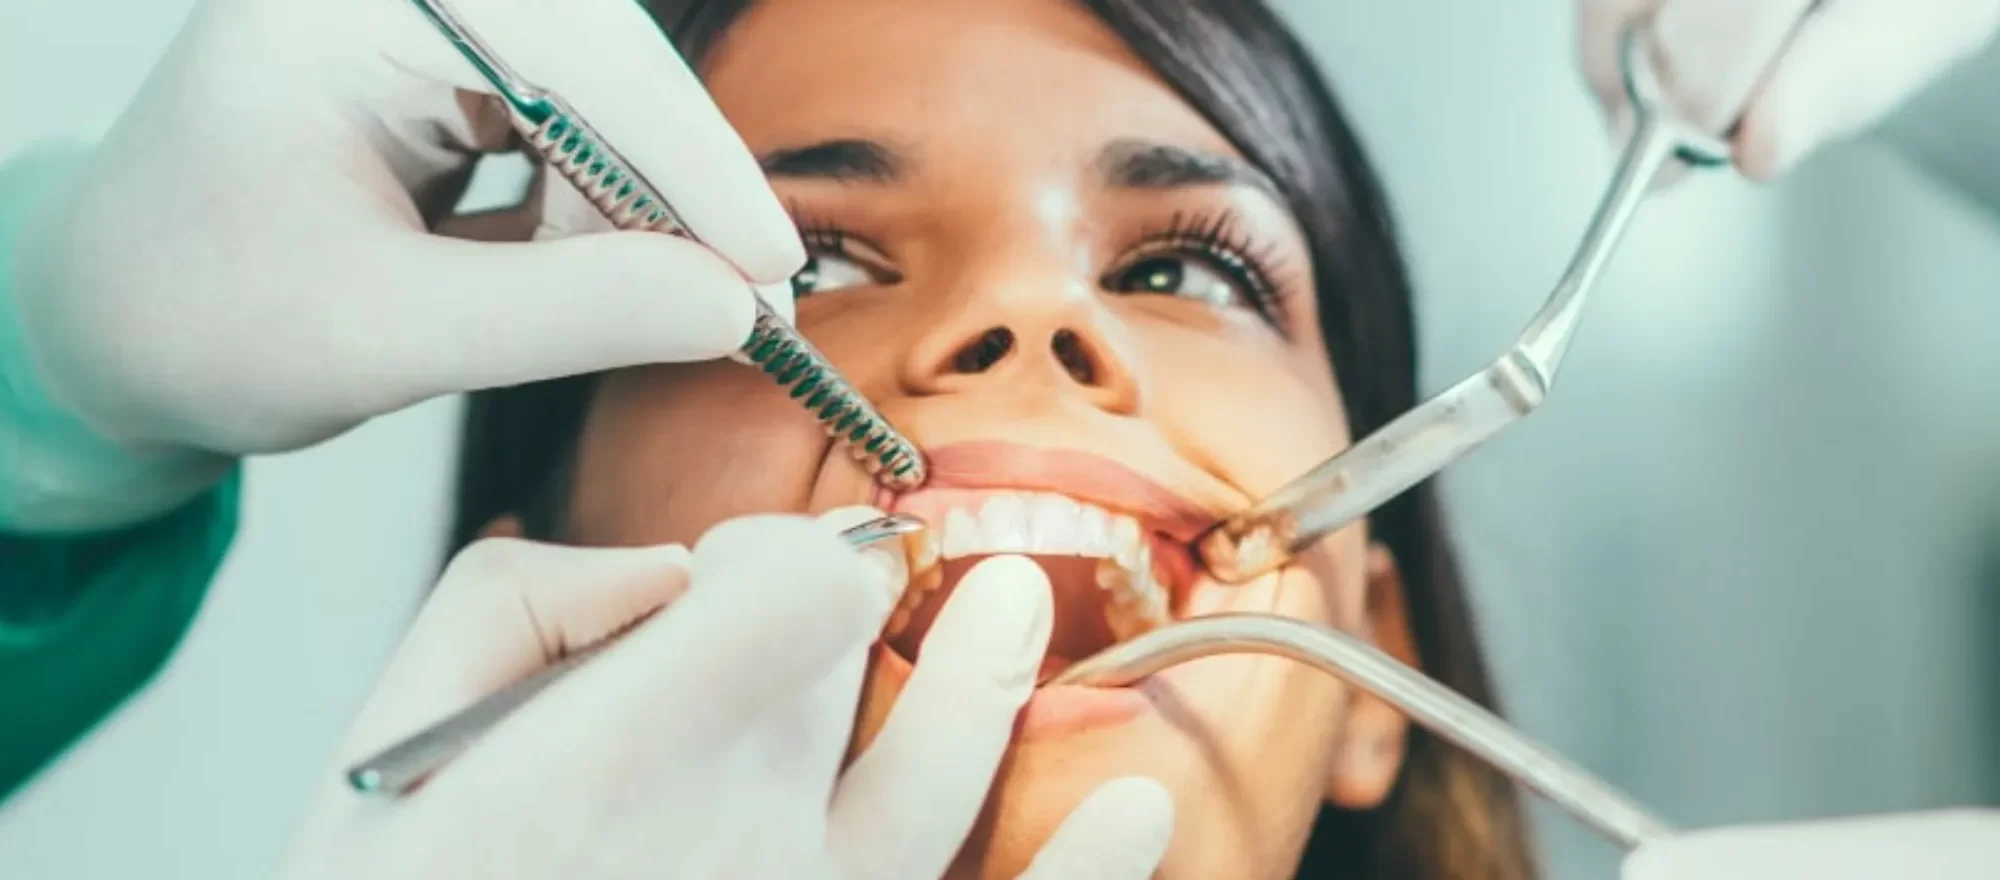 Choosing the Right Cosmetic Dentistry Procedure Guide